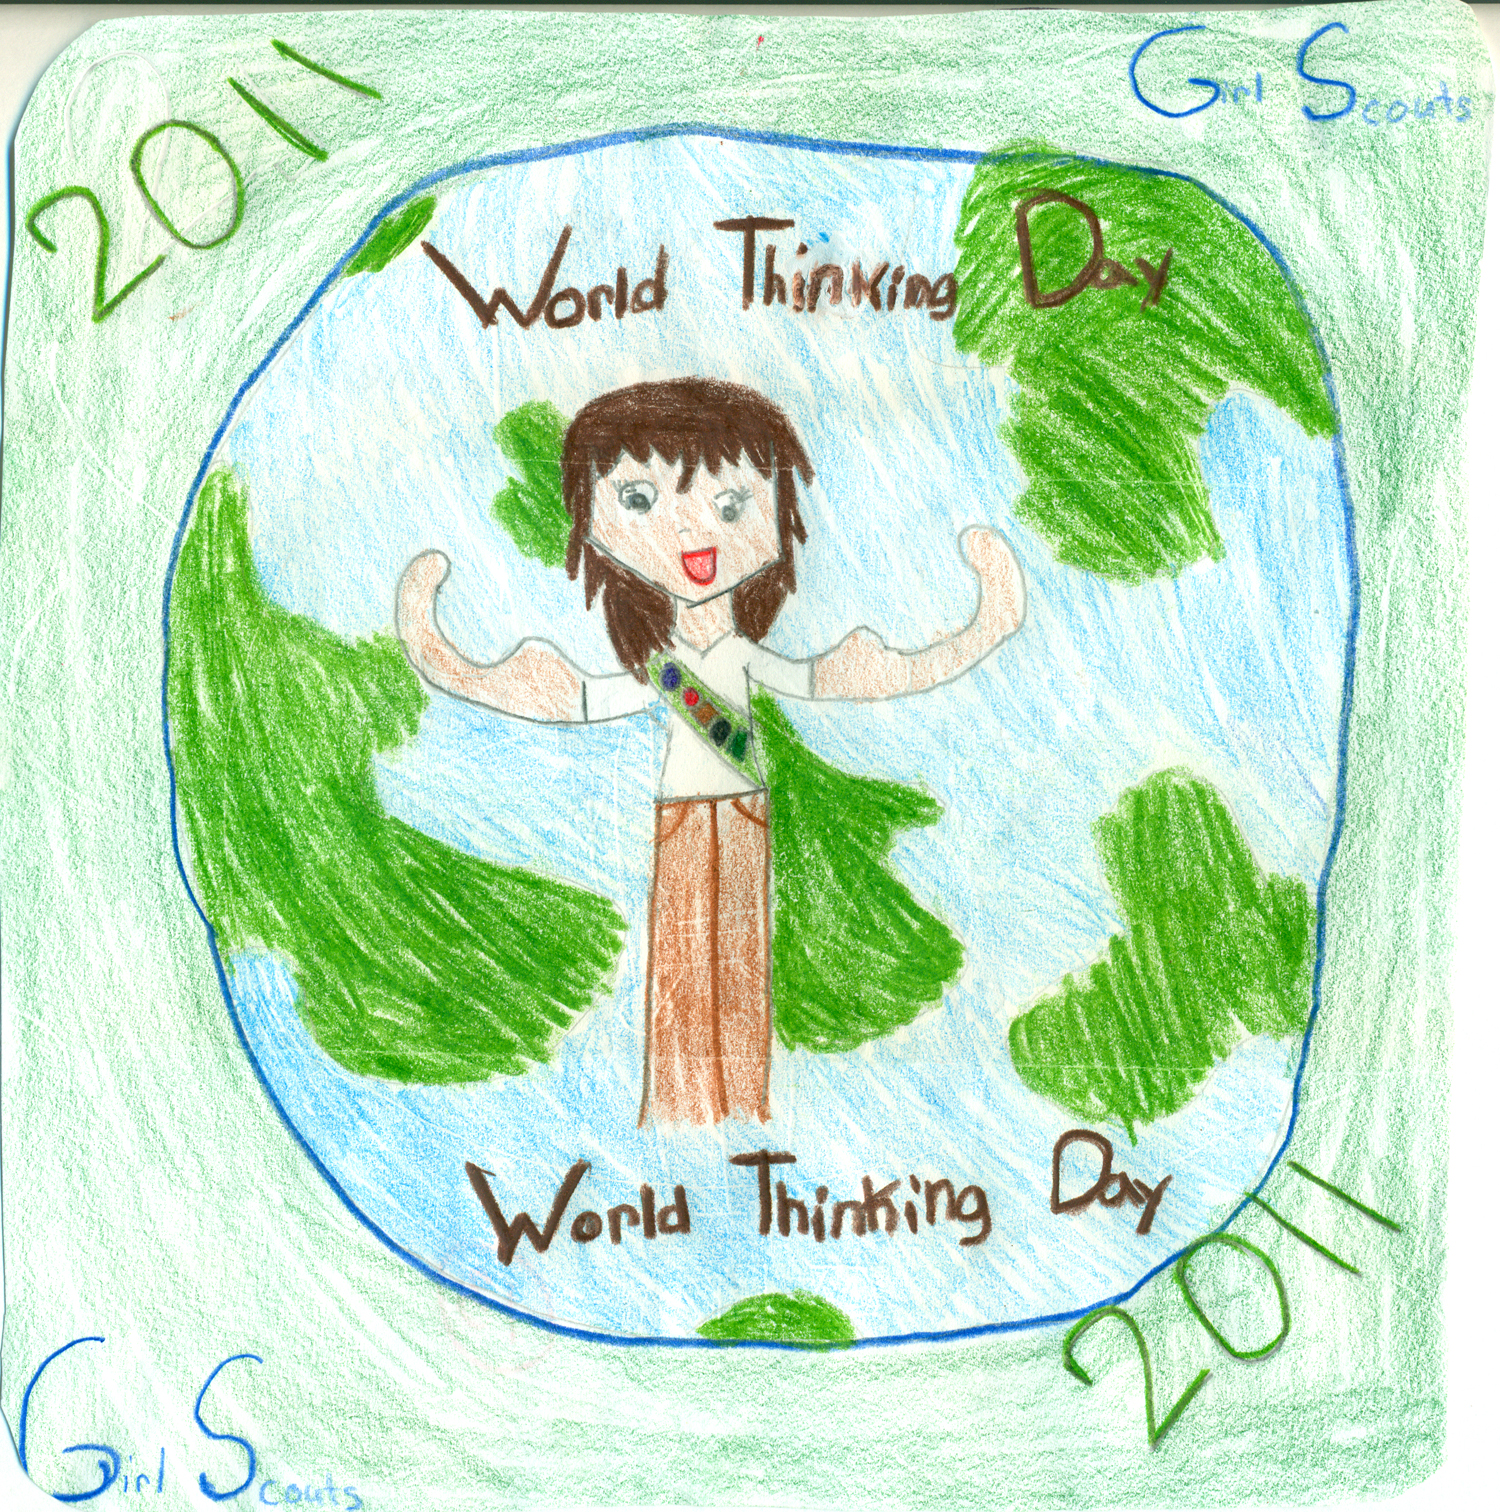 Girl Scout Thinking Day Patch 2011